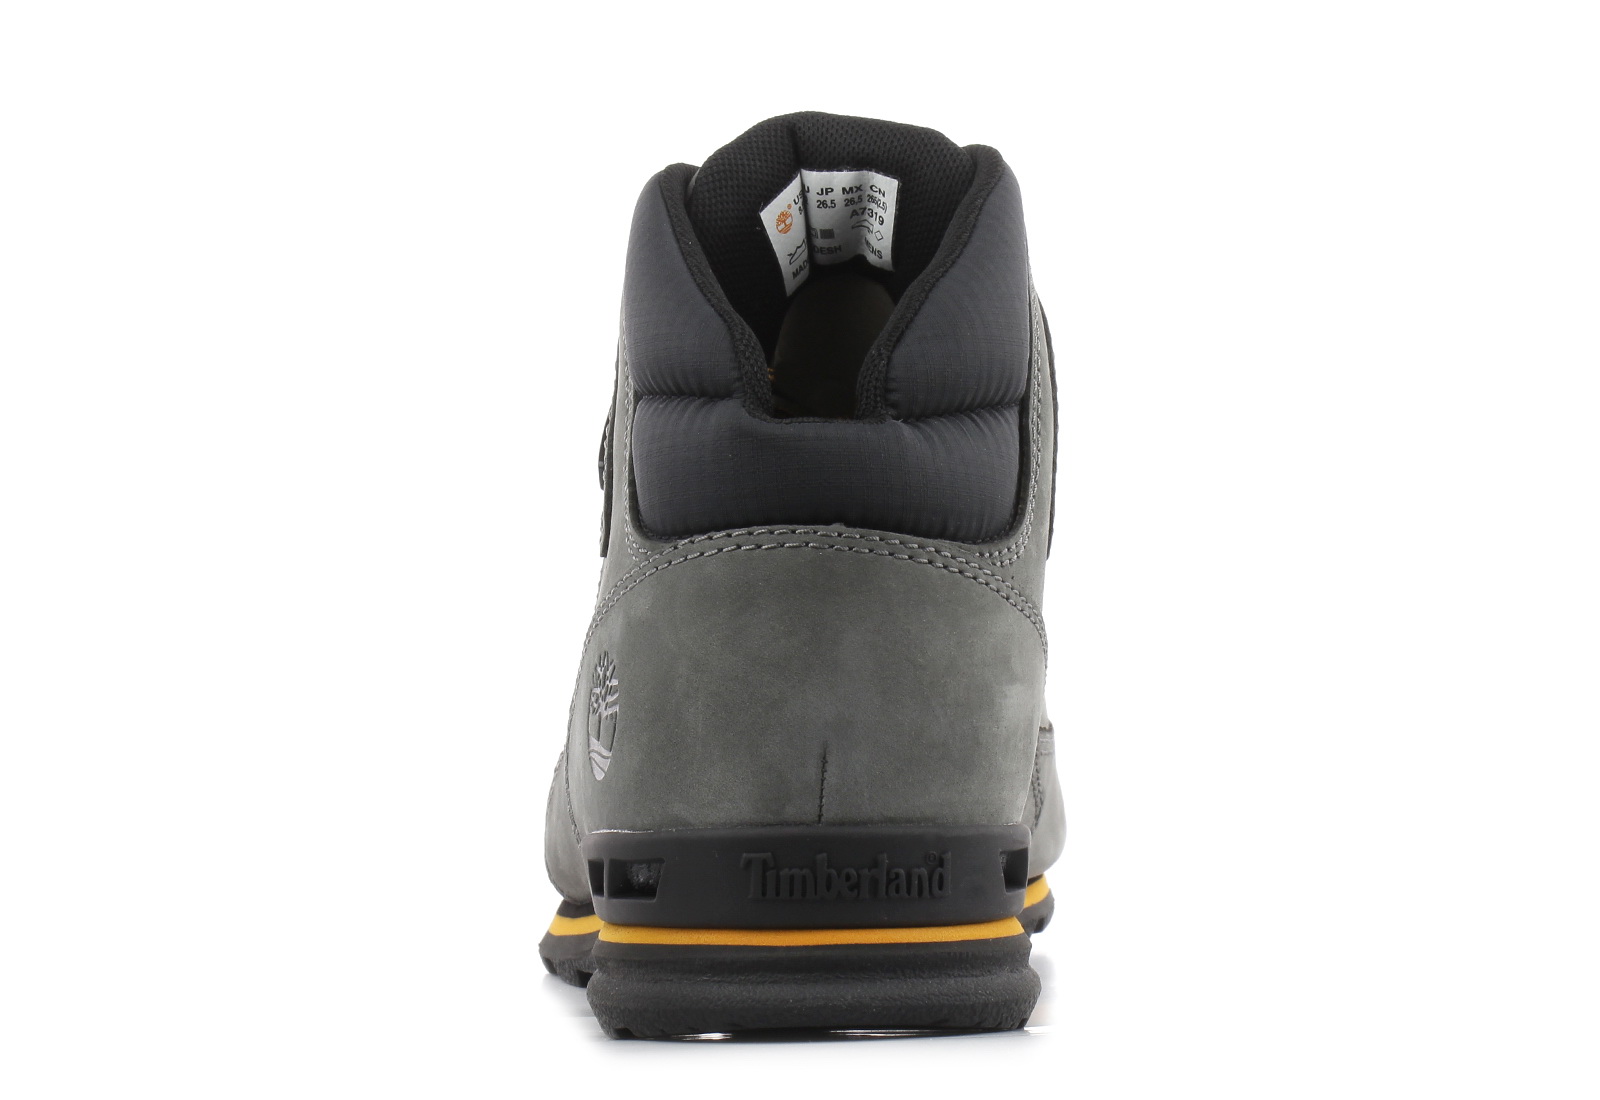 Timberland Hikers - Euro Rock Hiker - A2JDG-GRY - Online shop for ...